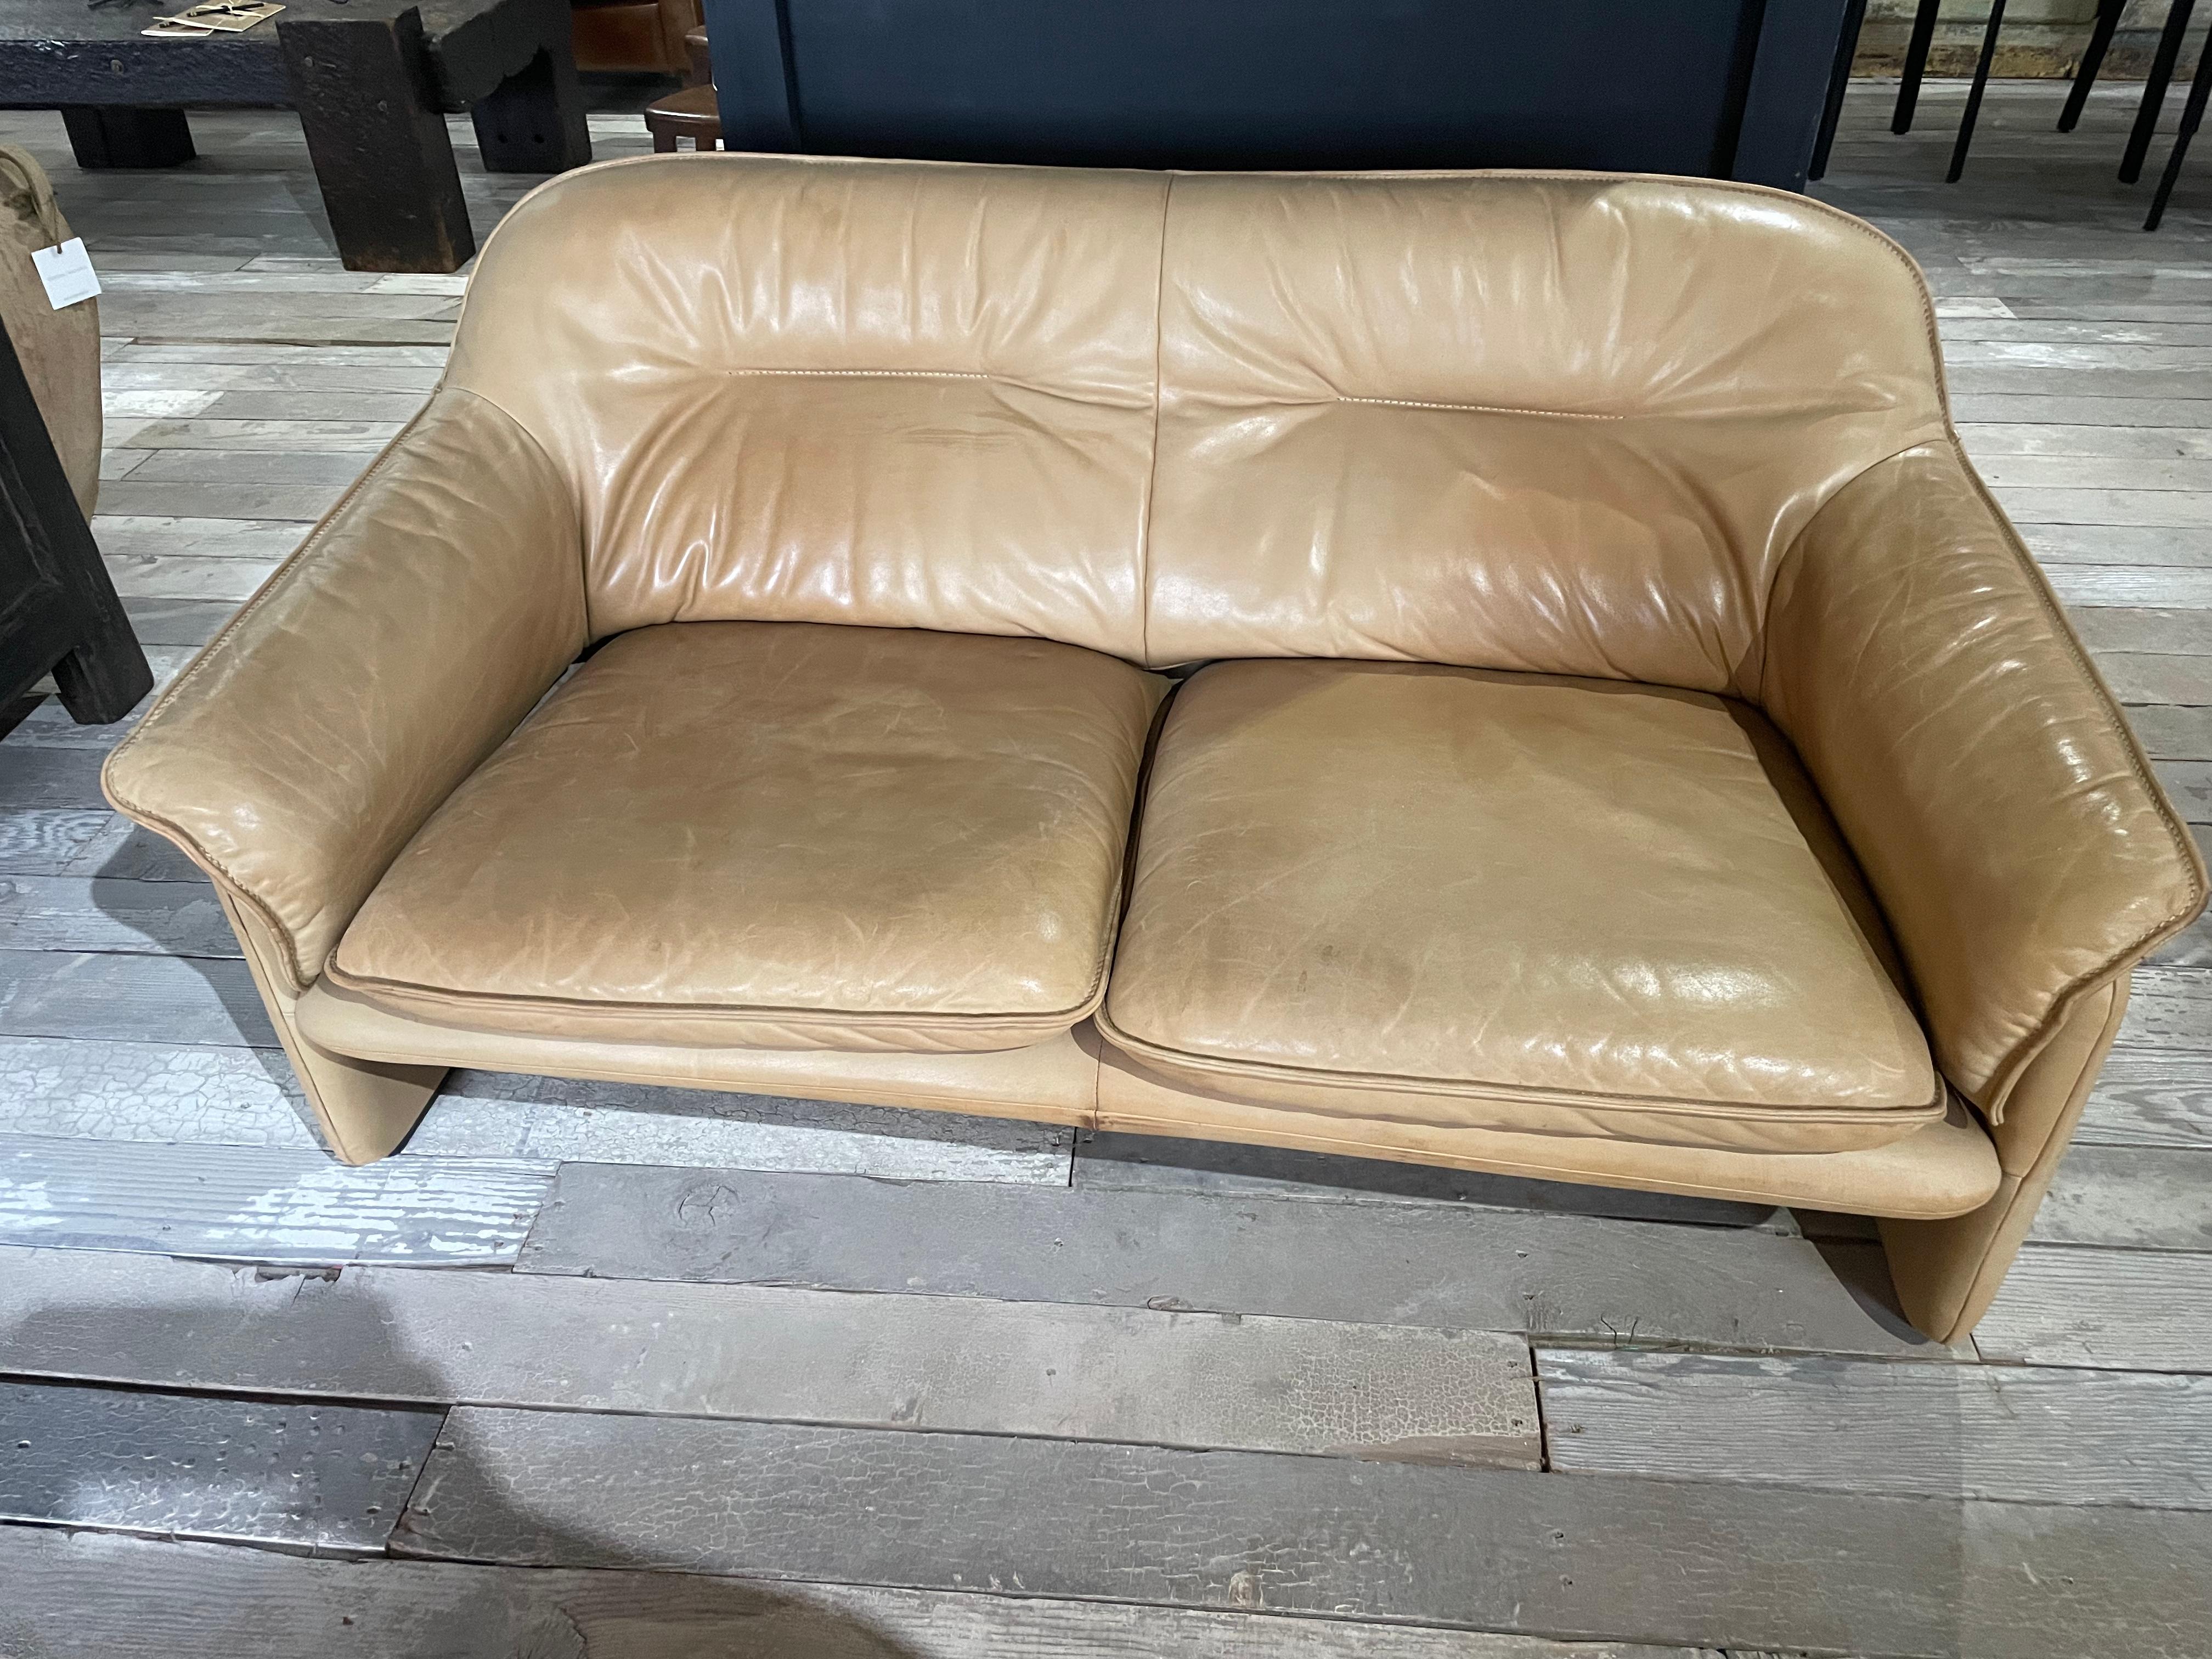 An iconic mid century design, this De Sede incredible 2 seat sofa/loveseat is no longer in production making it a collectible piece from the furniture manufacturer. Even though this a 2 seat sofa it feels much wider when 2 people are sitting in it